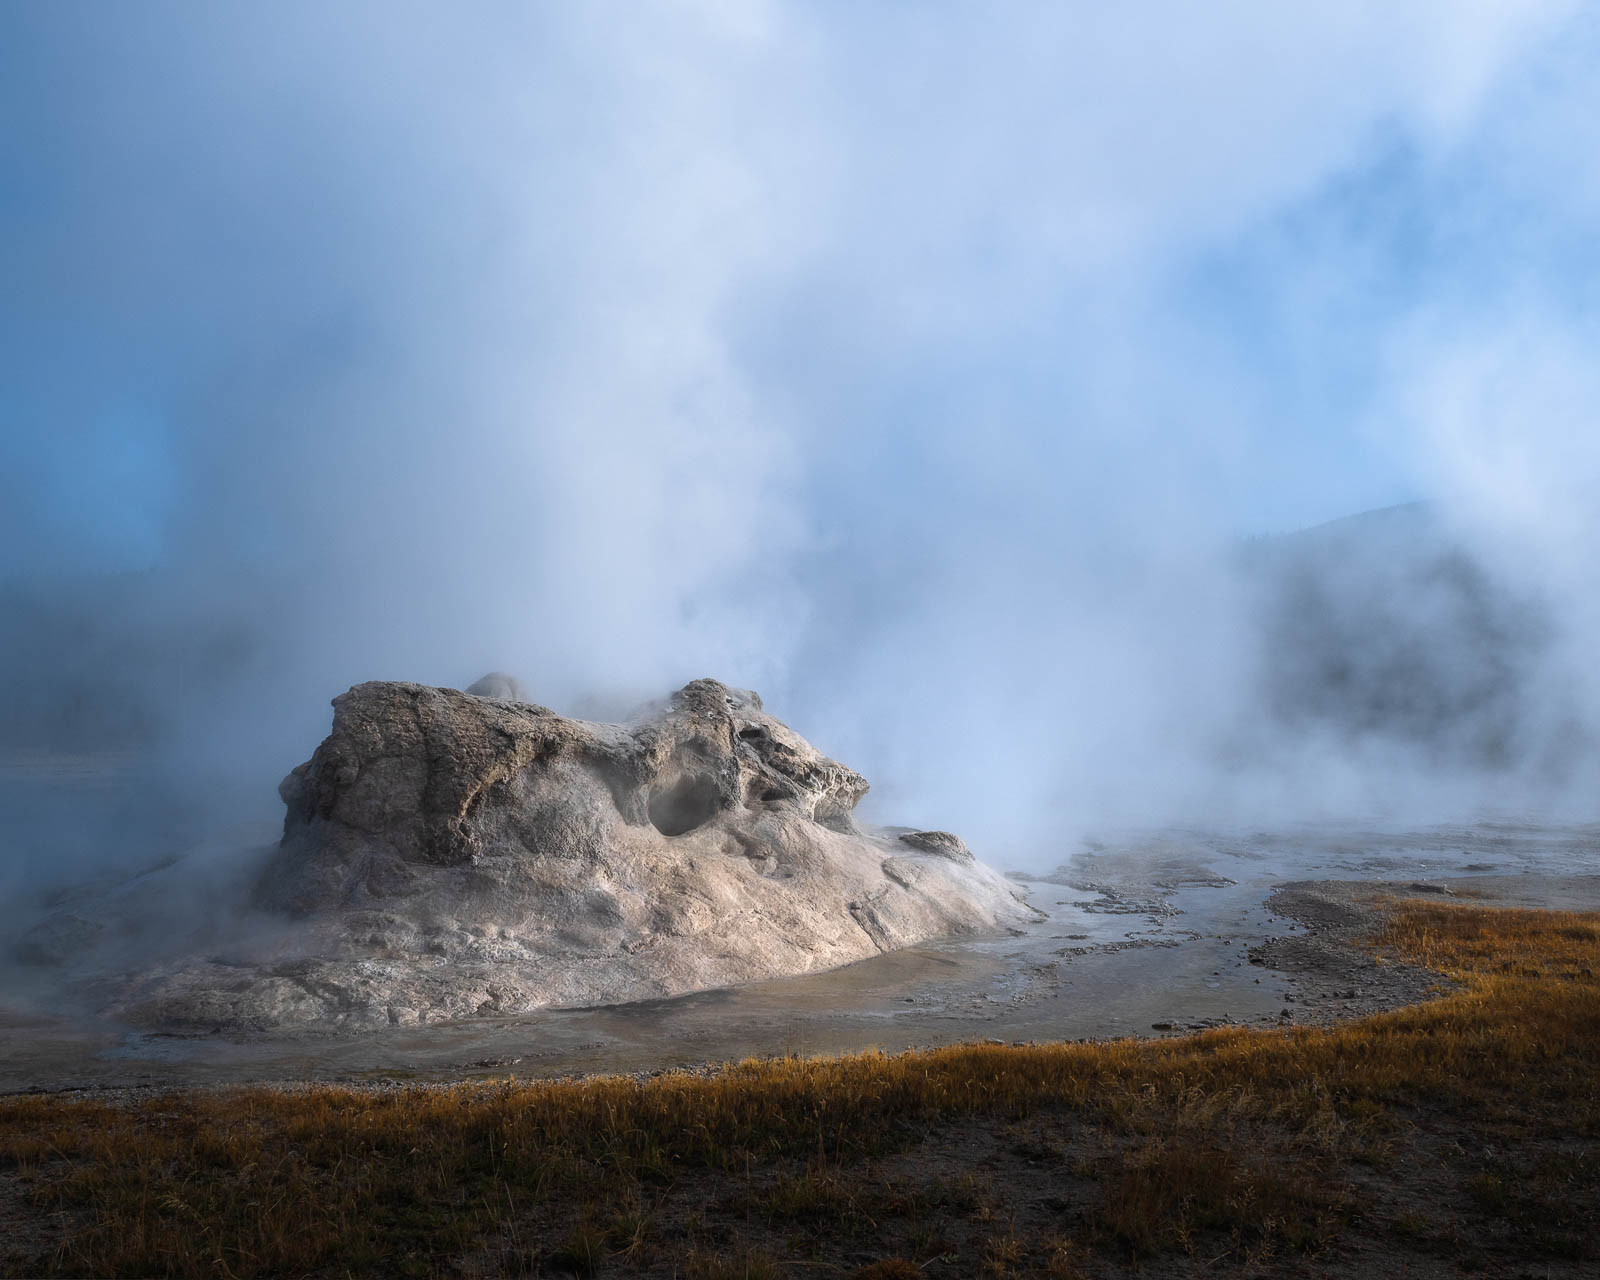 Grotto Geyser erupting at Yellowstone National Park